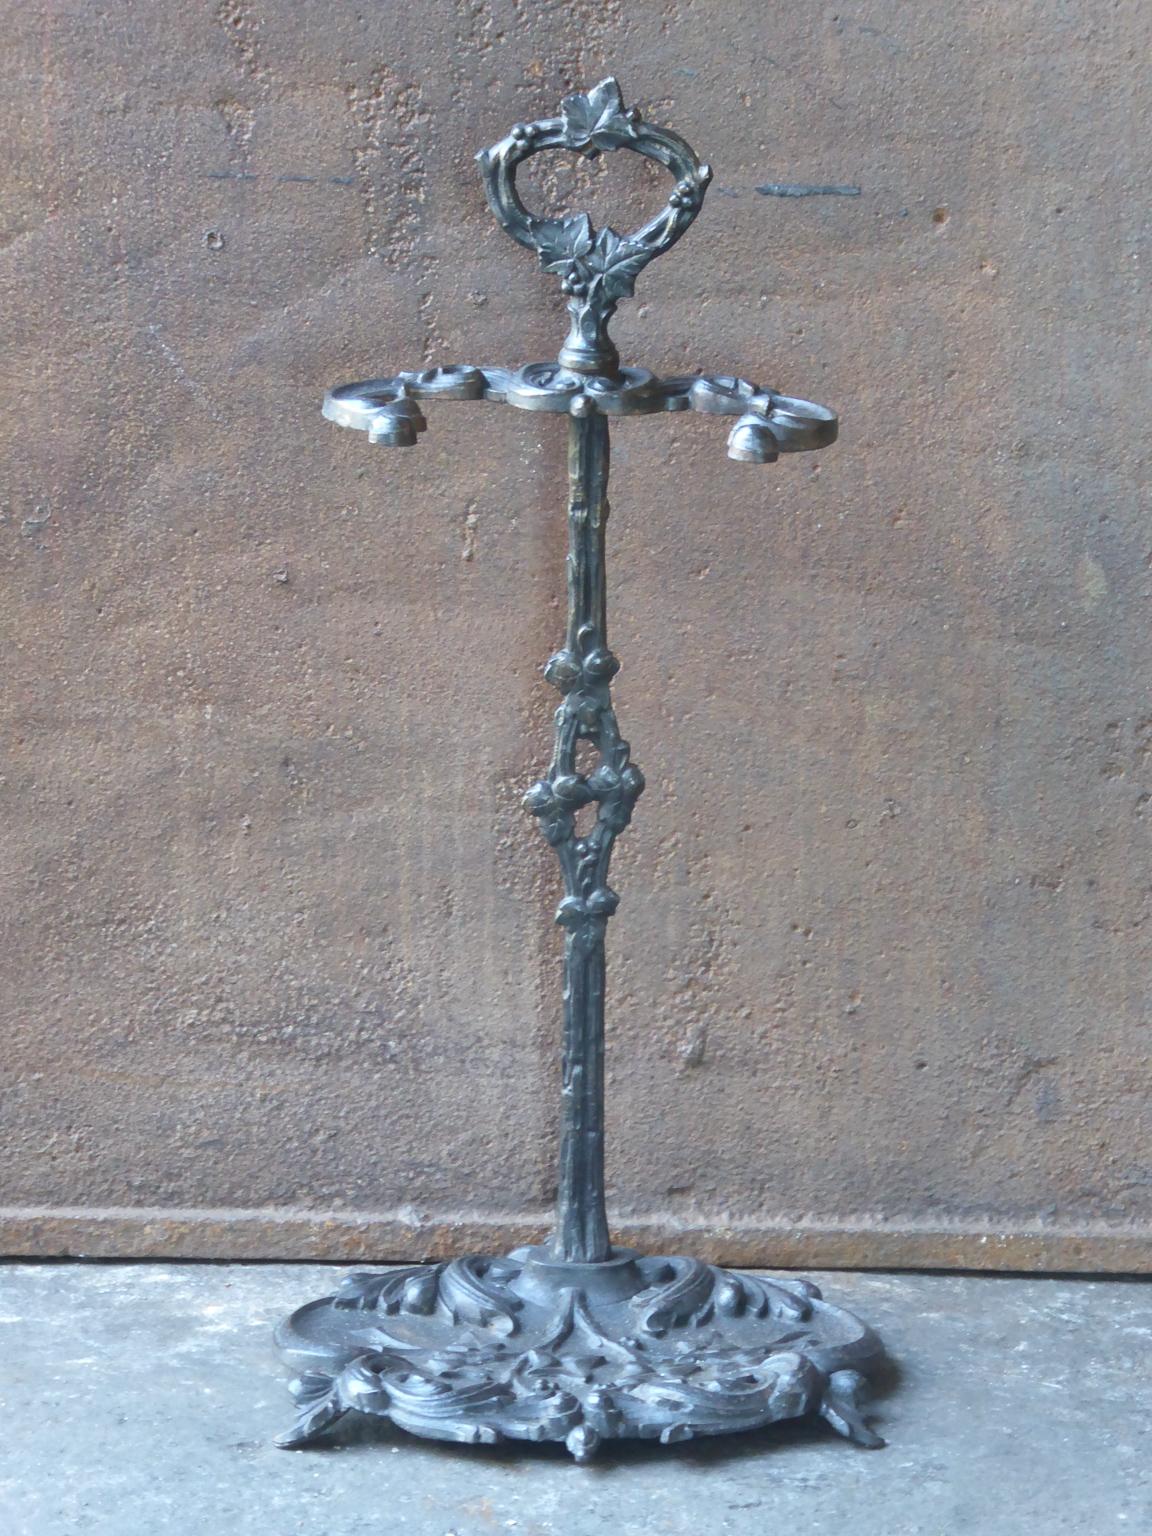 20th century French Napoleon III style fireplace tool stand. The stand is made of cast iron and has a black patina. The stand is in a good condition and is fully functional.








